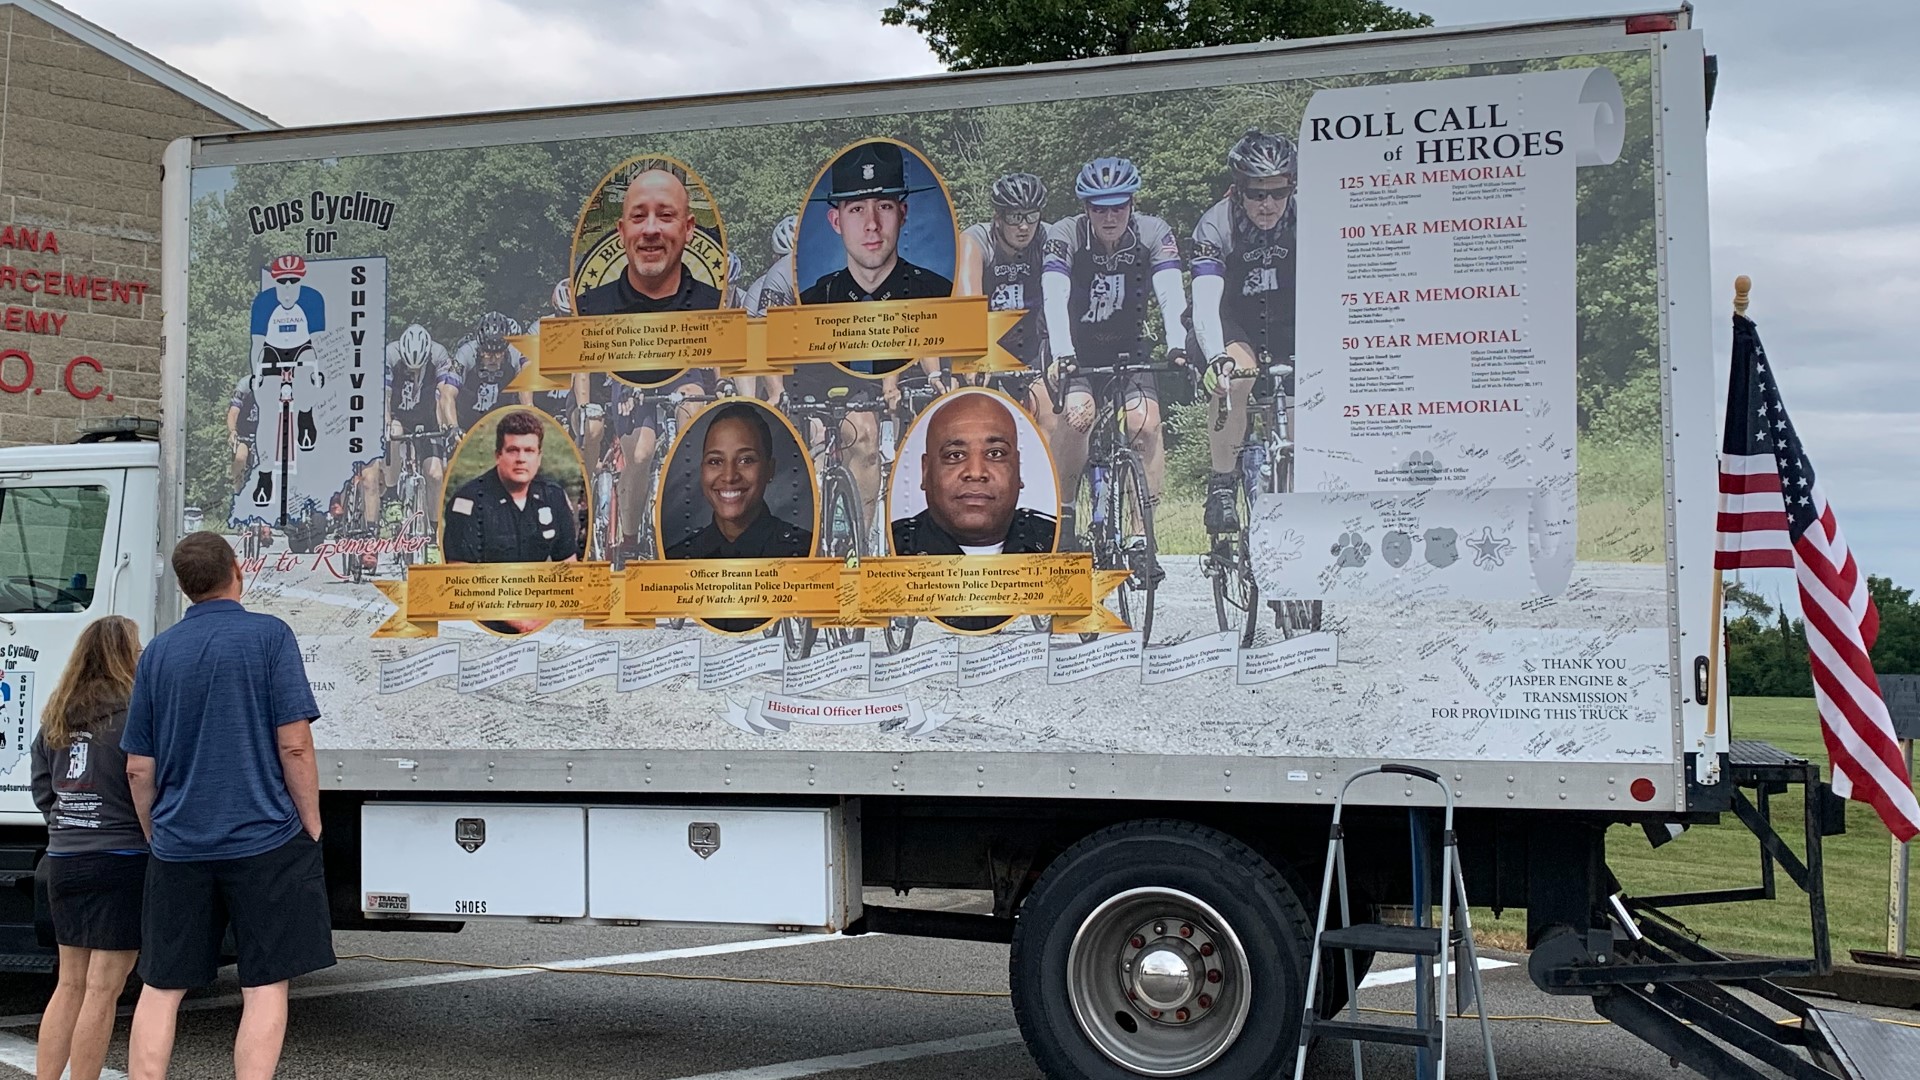 Dozens of cyclists hit the pavement Saturday for a special event to honor and remember Indiana law enforcement officers who've given the ultimate sacrifice.